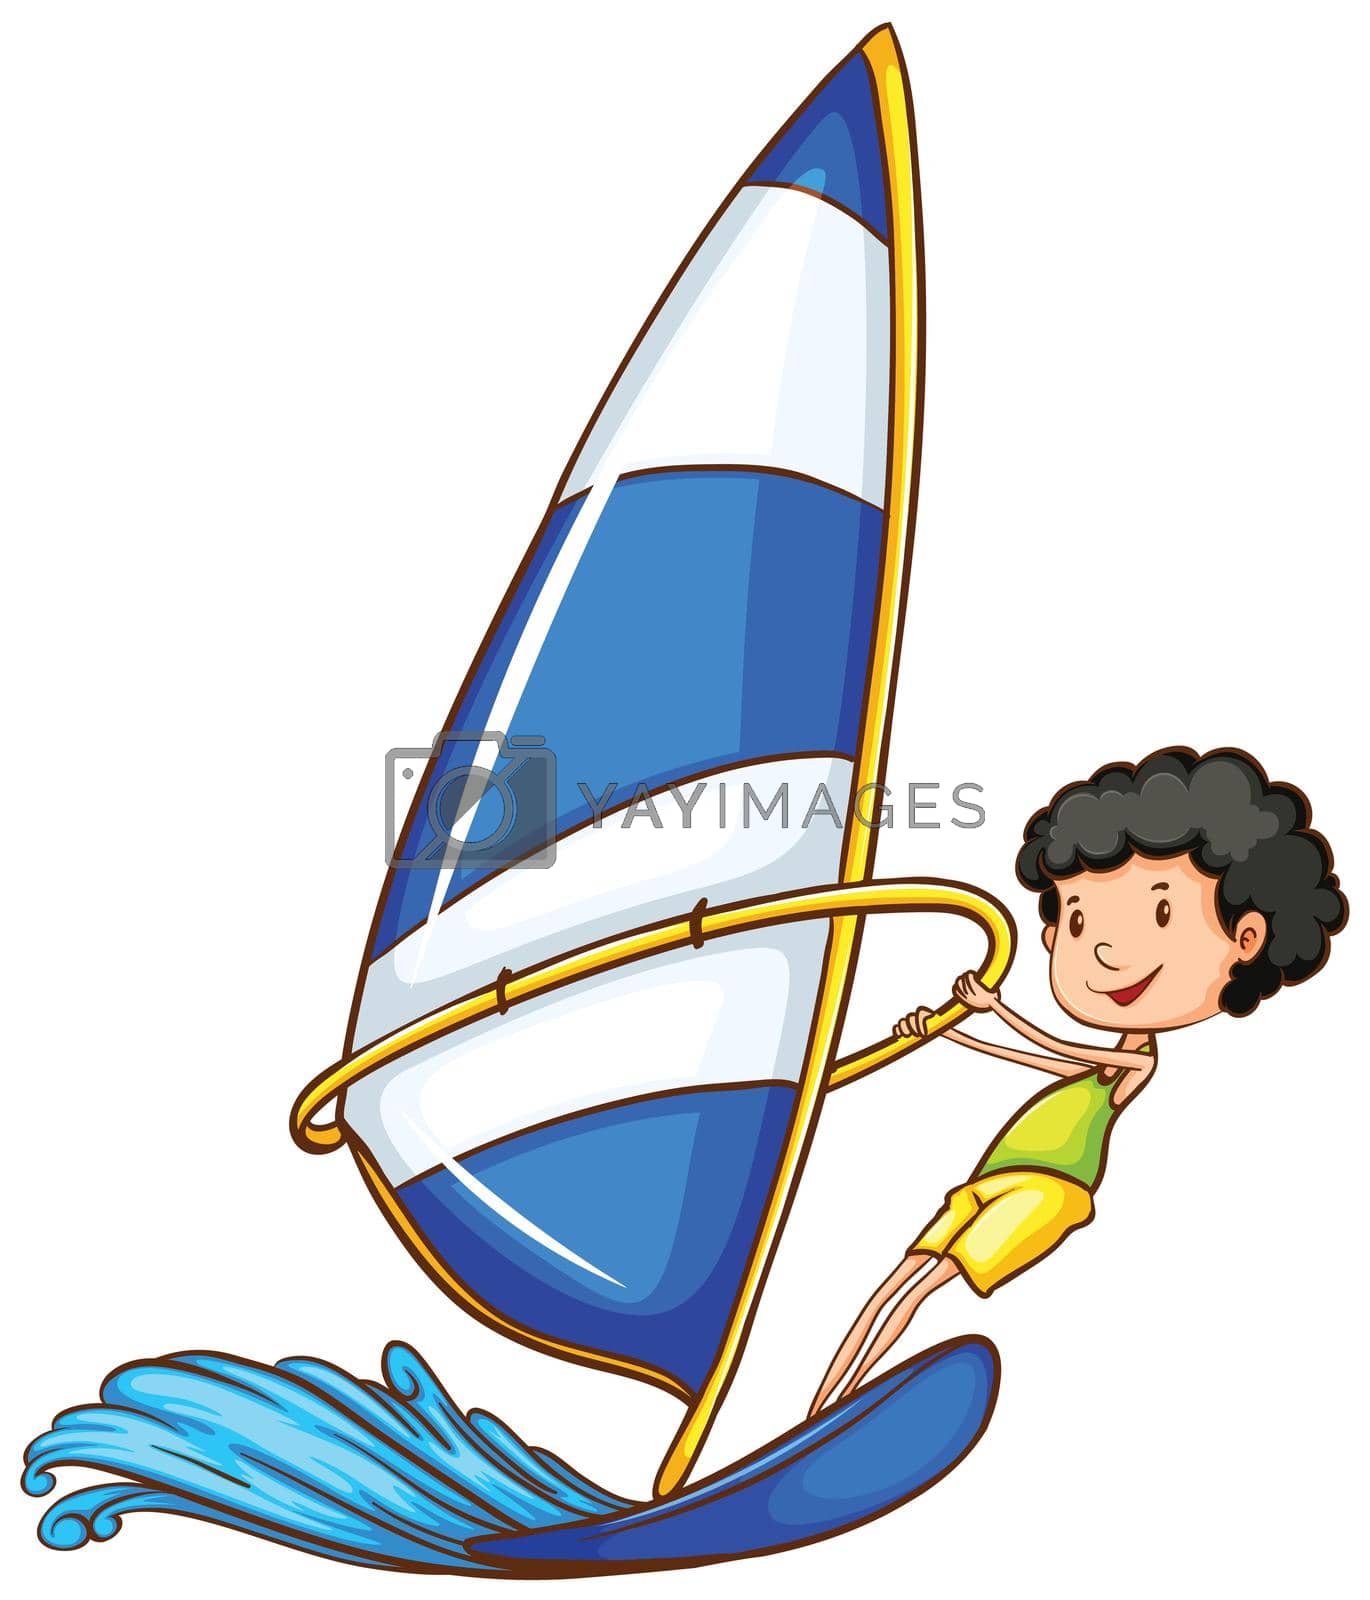 Royalty free image of A young boy enjoying the watersport activity by iimages